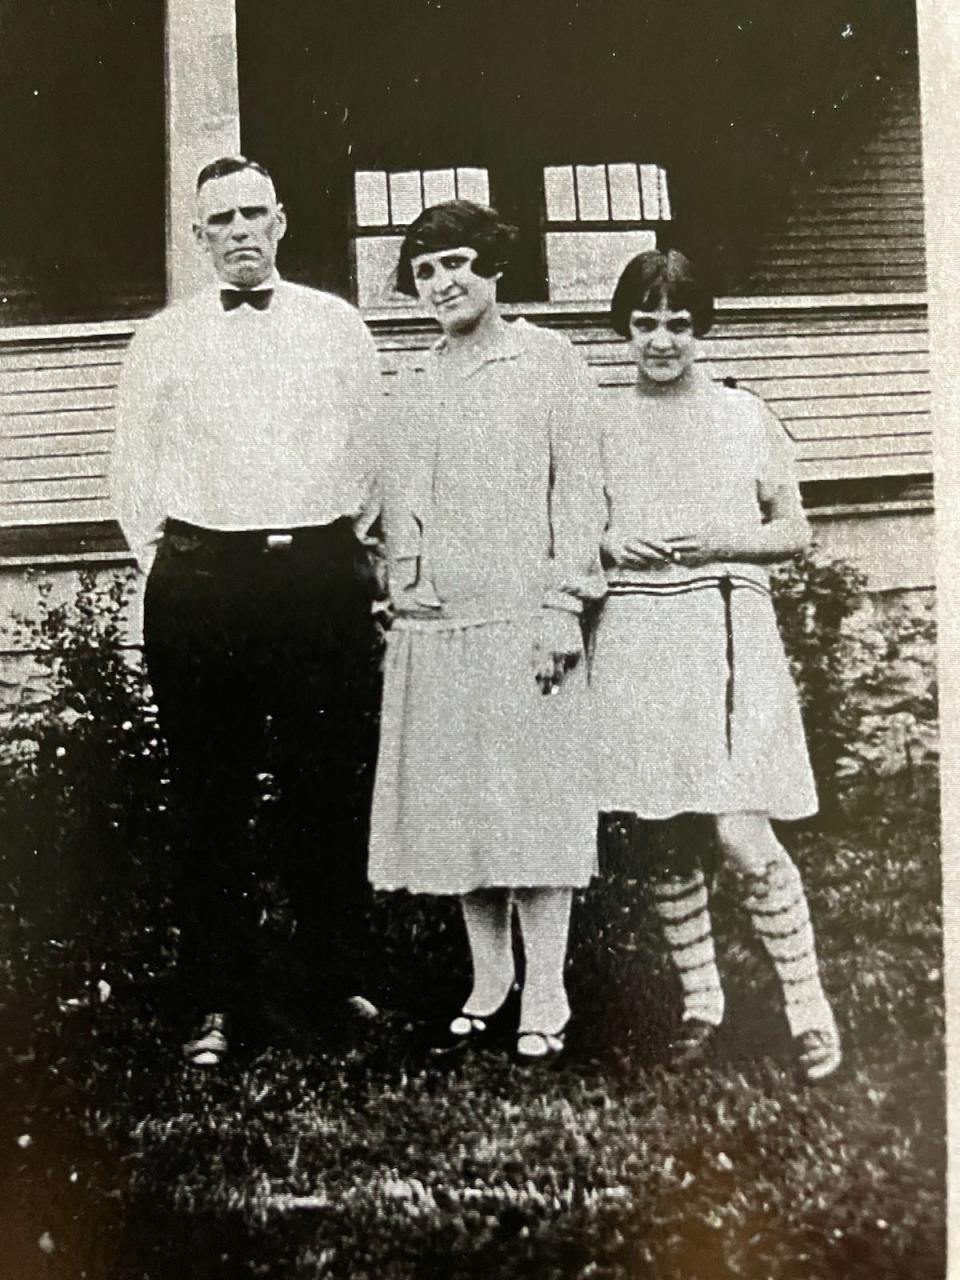 Ernest Knapp of Dover is shown with his wife, Sadie, and his daughter, Wilma, in this undated photo.